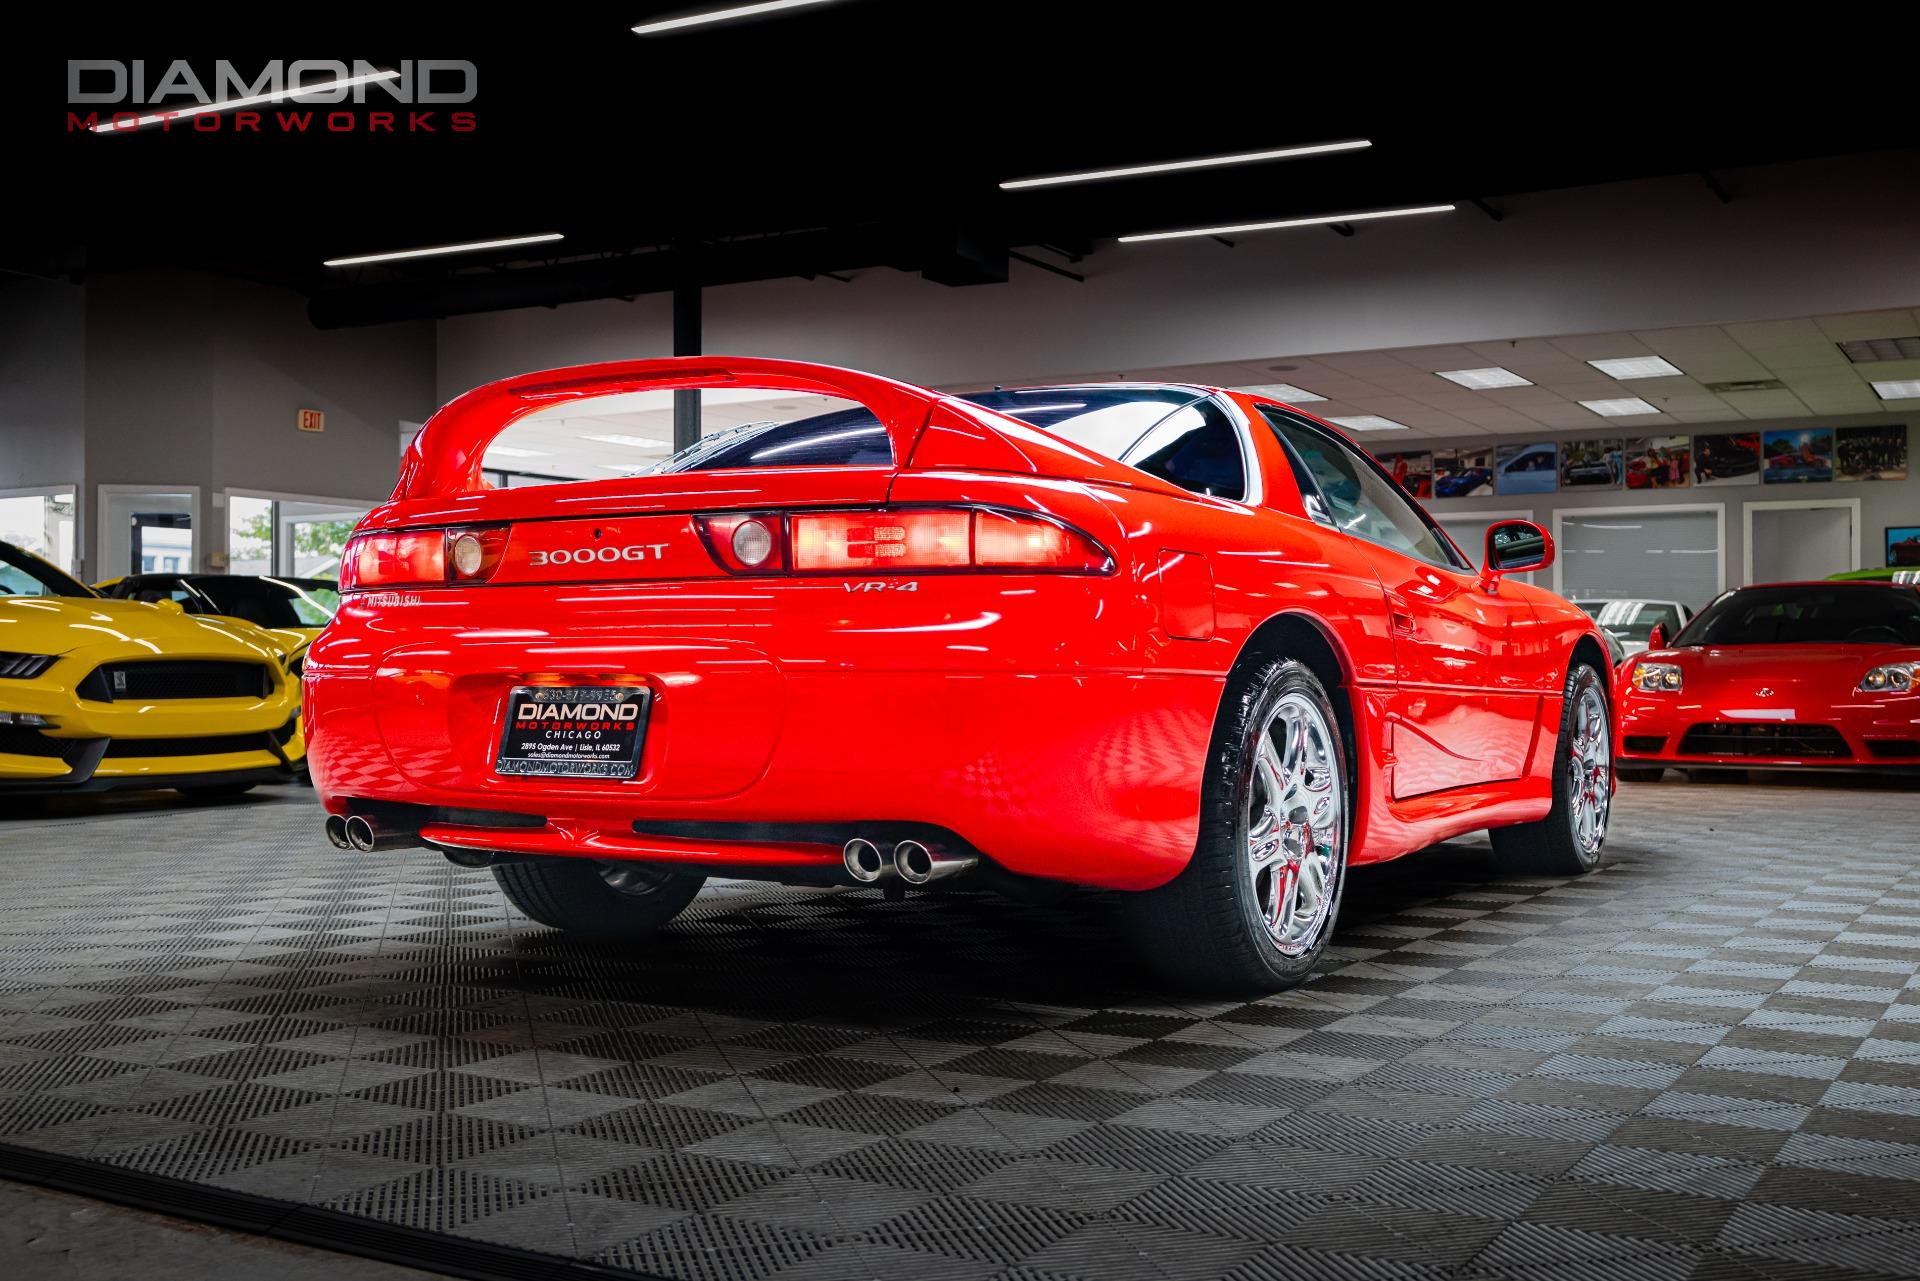 Used 1997 Mitsubishi 3000GT VR-4 Turbo For Sale ($21,800 